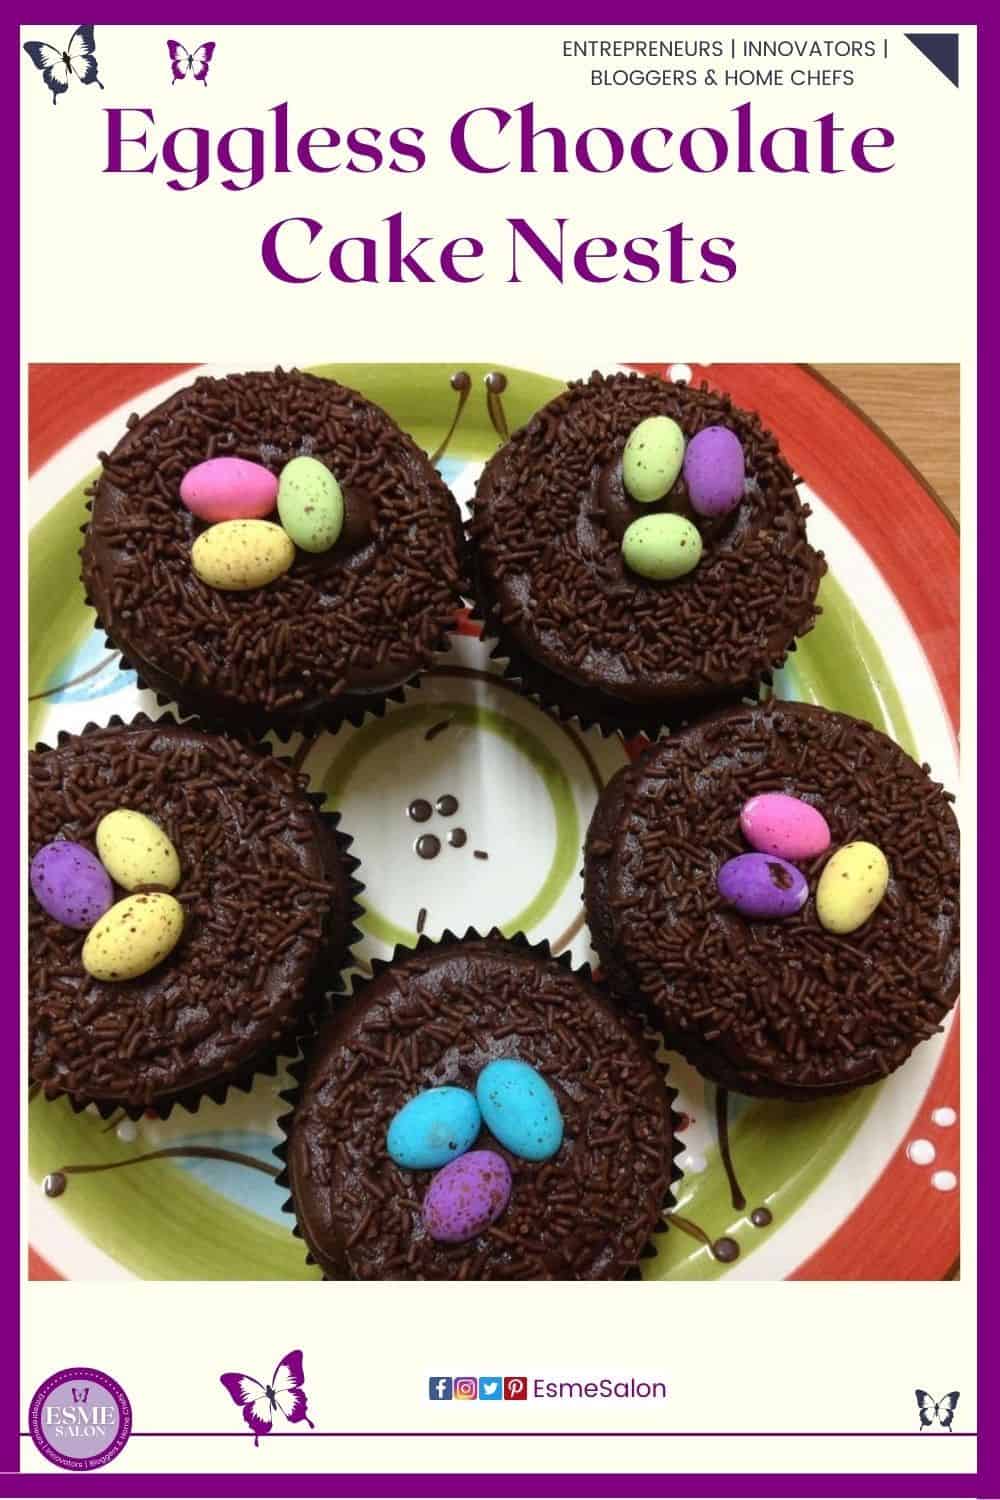 an image of a white and green round plate filled with 5 Eggless Chocolate Cake Nests with colored eggs and chocolate sprinkles as decoration